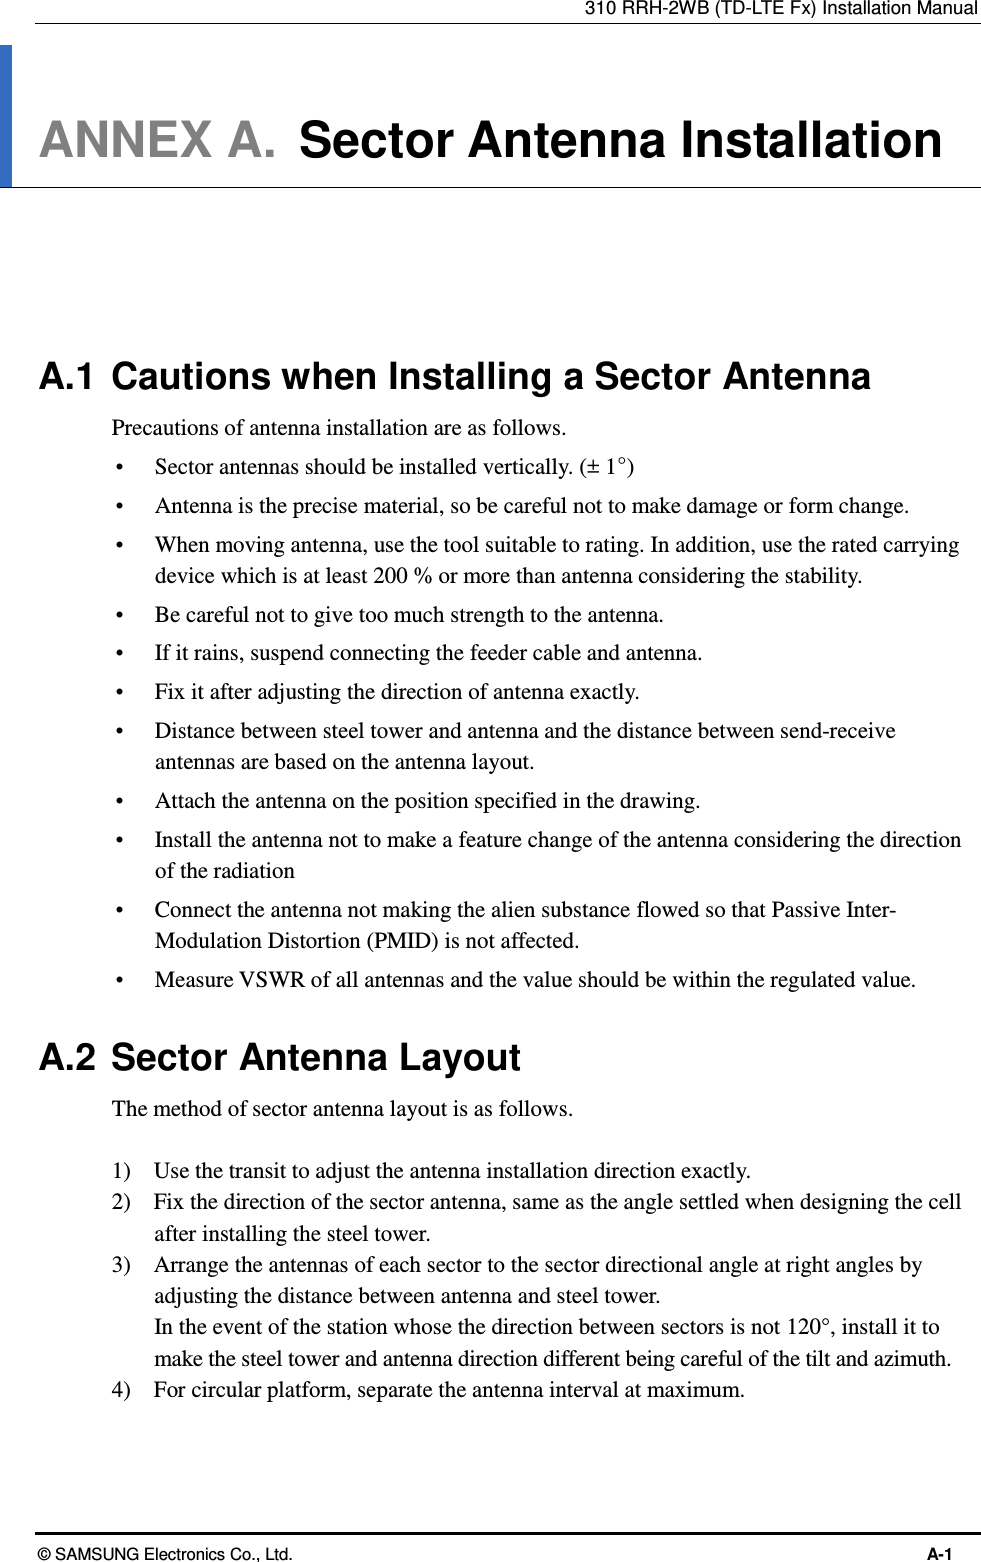 310 RRH-2WB (TD-LTE Fx) Installation Manual © SAMSUNG Electronics Co., Ltd.  A-1 ANNEX A.  Sector Antenna Installation      A.1  Cautions when Installing a Sector Antenna Precautions of antenna installation are as follows.  Sector antennas should be installed vertically. (± 1°)  Antenna is the precise material, so be careful not to make damage or form change.    When moving antenna, use the tool suitable to rating. In addition, use the rated carrying device which is at least 200 % or more than antenna considering the stability.  Be careful not to give too much strength to the antenna.    If it rains, suspend connecting the feeder cable and antenna.    Fix it after adjusting the direction of antenna exactly.    Distance between steel tower and antenna and the distance between send-receive antennas are based on the antenna layout.  Attach the antenna on the position specified in the drawing.    Install the antenna not to make a feature change of the antenna considering the direction of the radiation    Connect the antenna not making the alien substance flowed so that Passive Inter-Modulation Distortion (PMID) is not affected.  Measure VSWR of all antennas and the value should be within the regulated value.  A.2  Sector Antenna Layout The method of sector antenna layout is as follows.  1)    Use the transit to adjust the antenna installation direction exactly. 2)    Fix the direction of the sector antenna, same as the angle settled when designing the cell after installing the steel tower. 3)    Arrange the antennas of each sector to the sector directional angle at right angles by adjusting the distance between antenna and steel tower. In the event of the station whose the direction between sectors is not 120°, install it to make the steel tower and antenna direction different being careful of the tilt and azimuth. 4)    For circular platform, separate the antenna interval at maximum.  